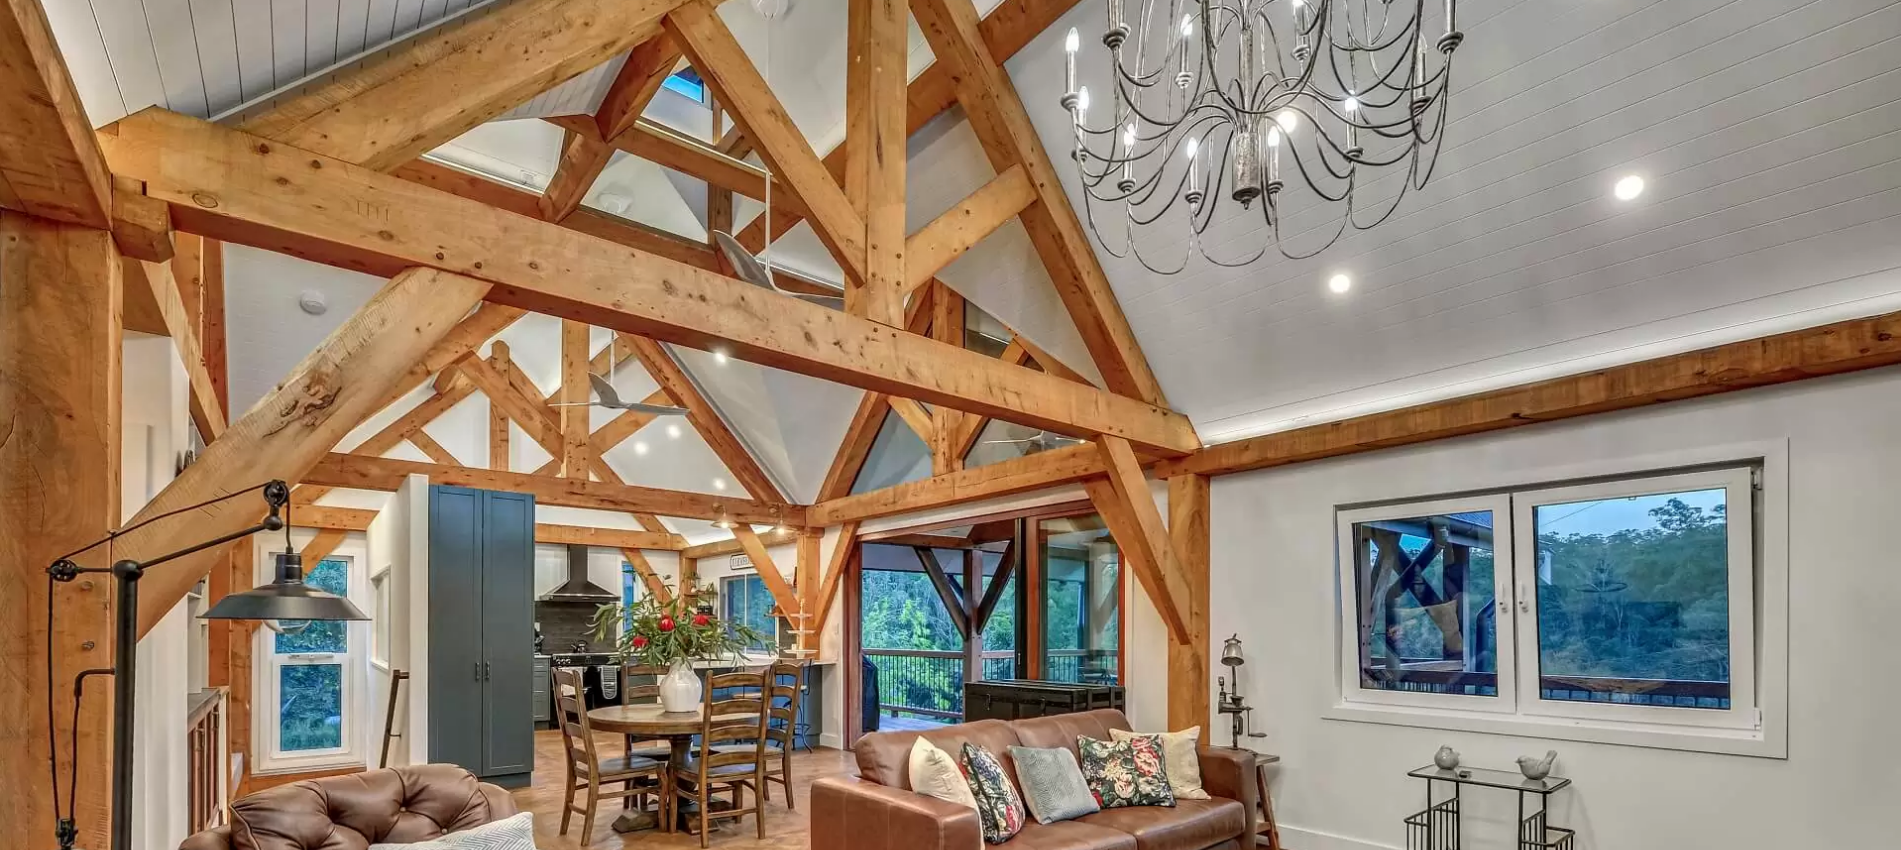 exposed post and beam framing creating a stunning ambience and sense of space inside a federation home